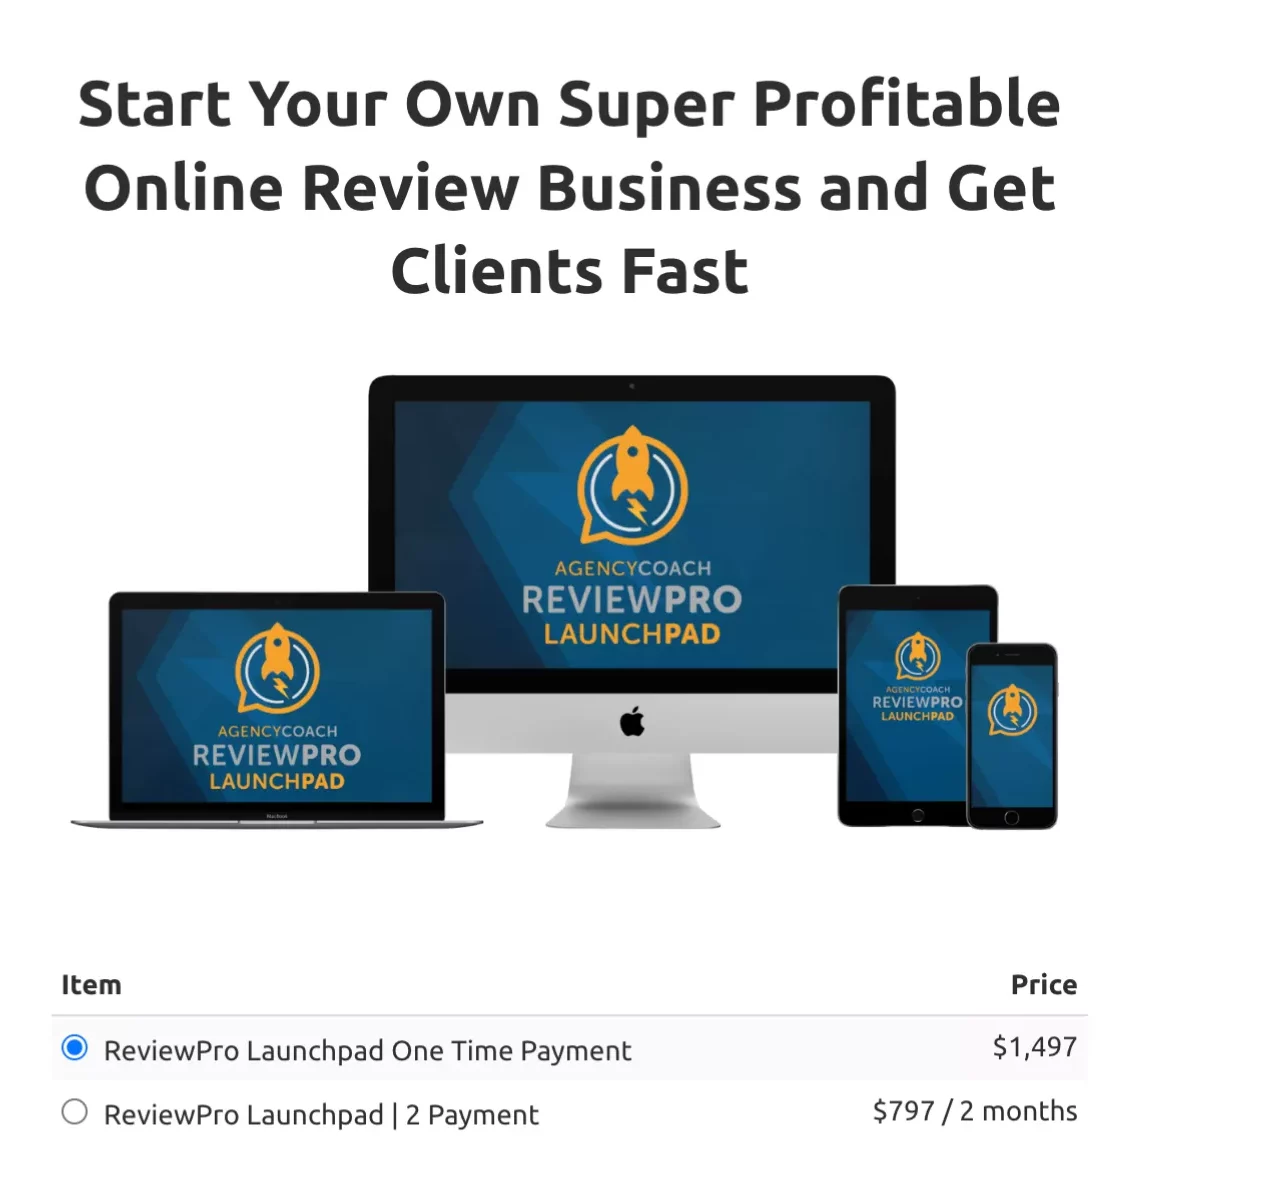 Reviewpro Launchpad cost